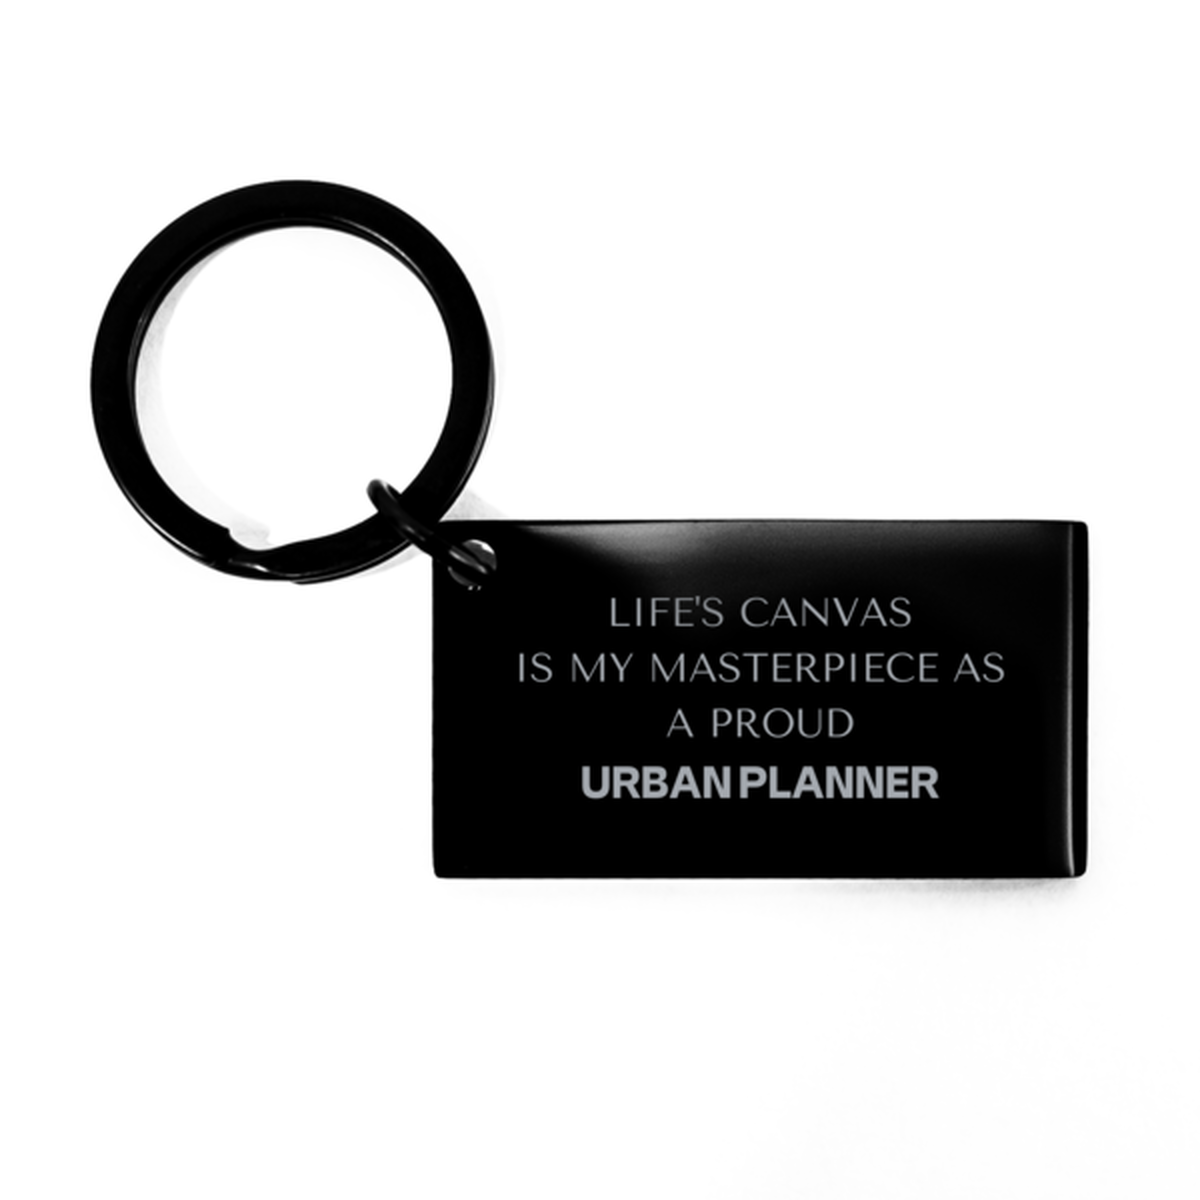 Proud Urban Planner Gifts, Life's canvas is my masterpiece, Epic Birthday Christmas Unique Keychain For Urban Planner, Coworkers, Men, Women, Friends